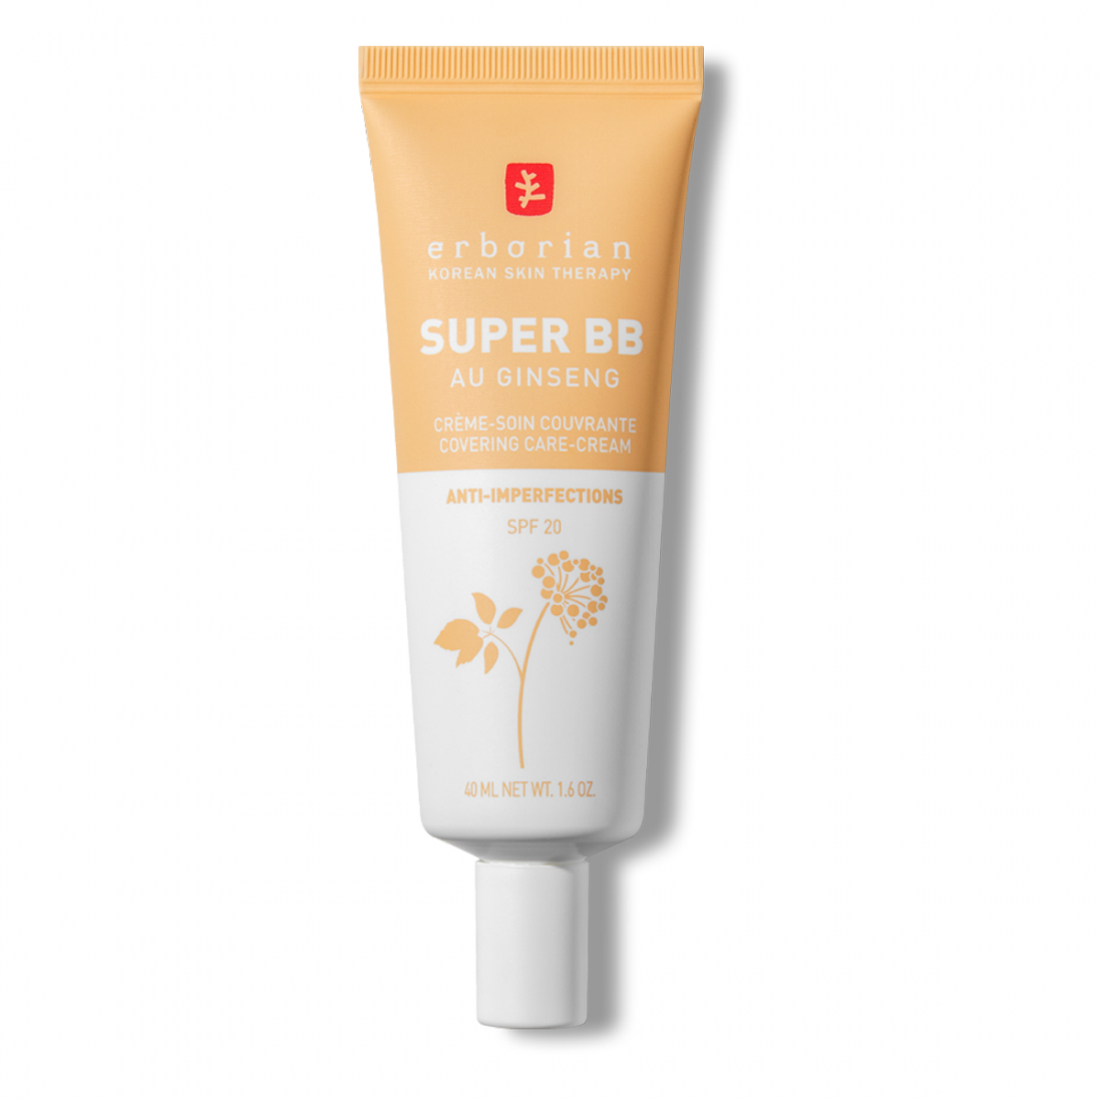 'Super BB au Ginseg Soin Couvrante Anti-Imperfections' BB Creme - Nude 40 ml